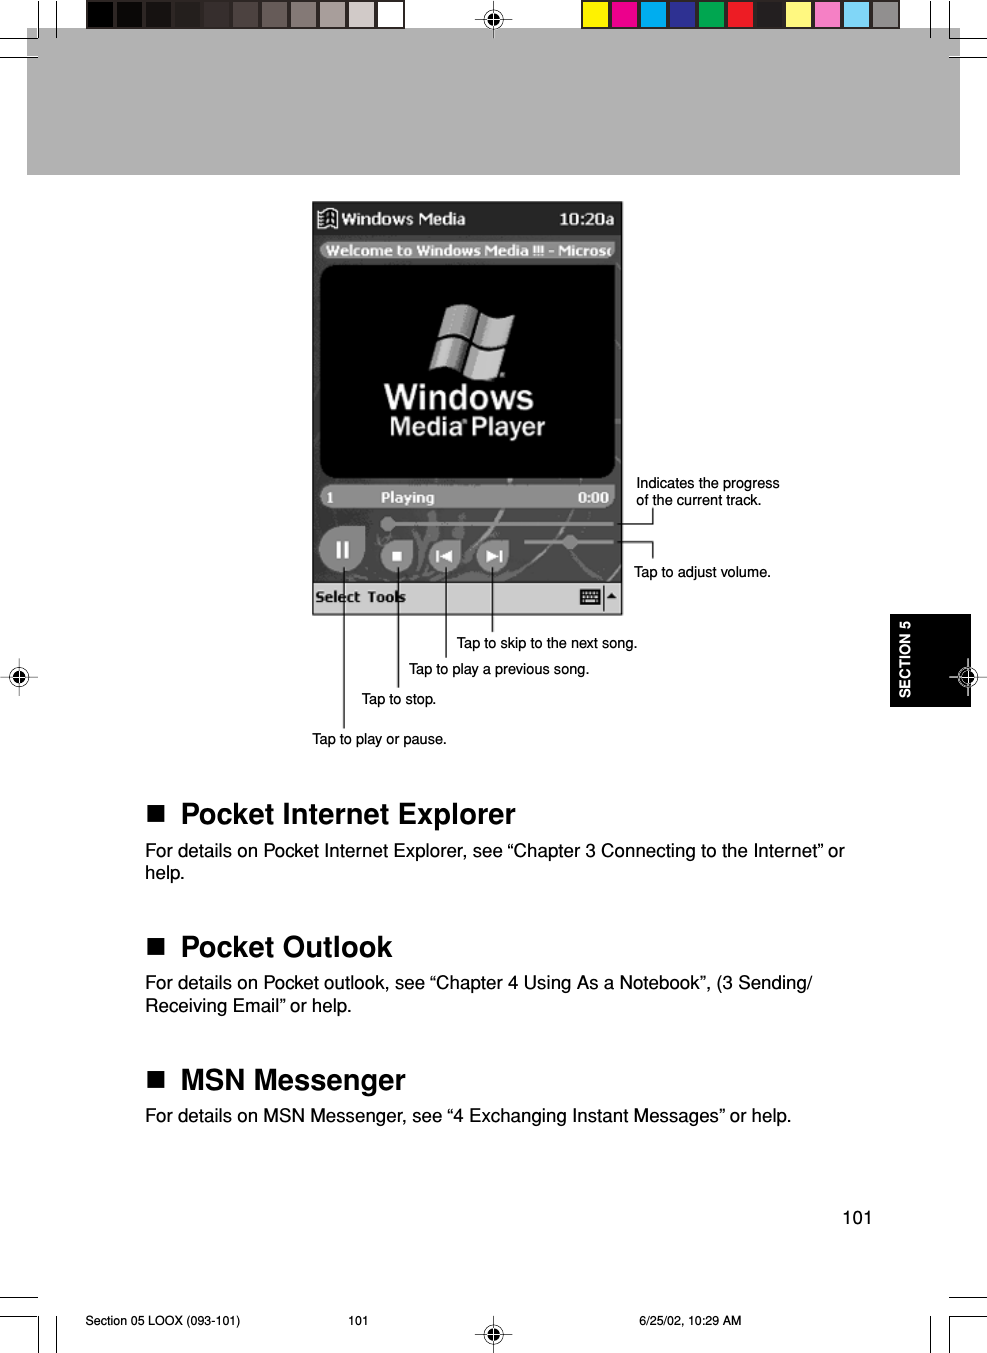 101SECTION 5Pocket Internet ExplorerFor details on Pocket Internet Explorer, see “Chapter 3 Connecting to the Internet” orhelp.Pocket OutlookFor details on Pocket outlook, see “Chapter 4 Using As a Notebook”, (3 Sending/Receiving Email” or help.MSN MessengerFor details on MSN Messenger, see “4 Exchanging Instant Messages” or help.Indicates the progressof the current track.Tap to adjust volume.Tap to play or pause.Tap to stop.Tap to play a previous song.Tap to skip to the next song.Section 05 LOOX (093-101) 6/25/02, 10:29 AM101